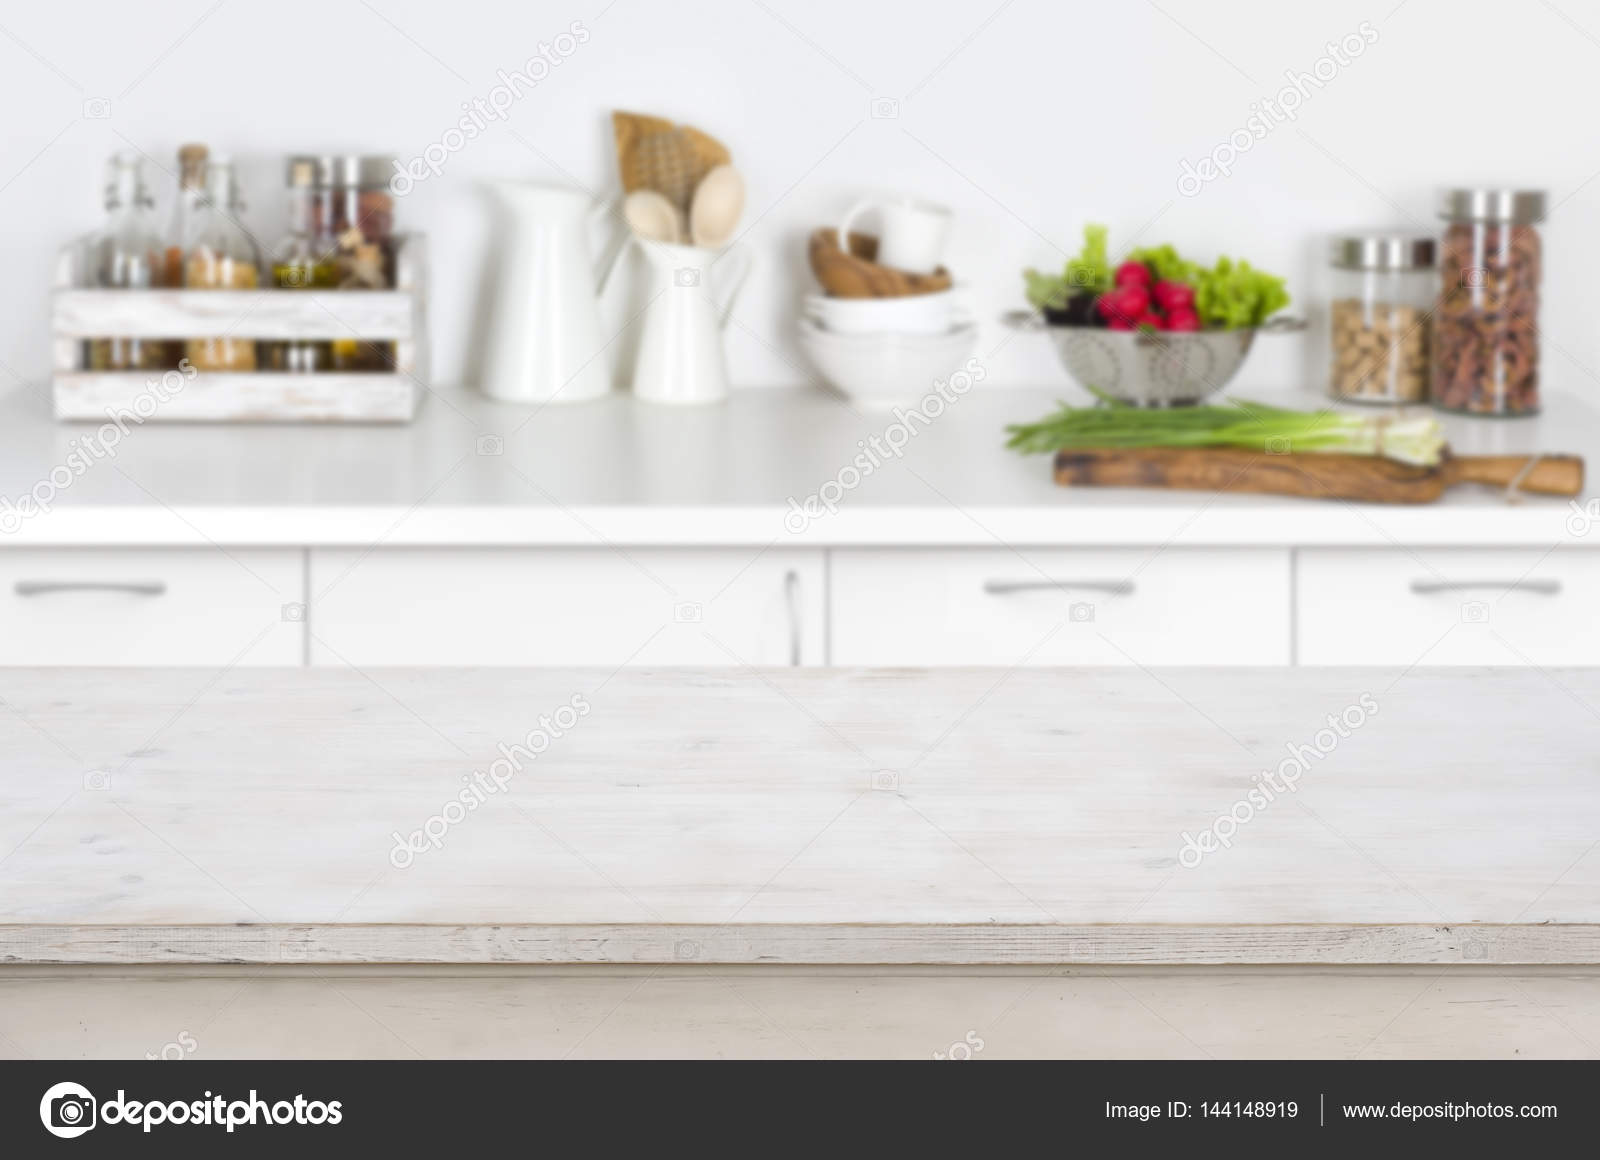 Wooden table on blurred kitchen interior background with fresh